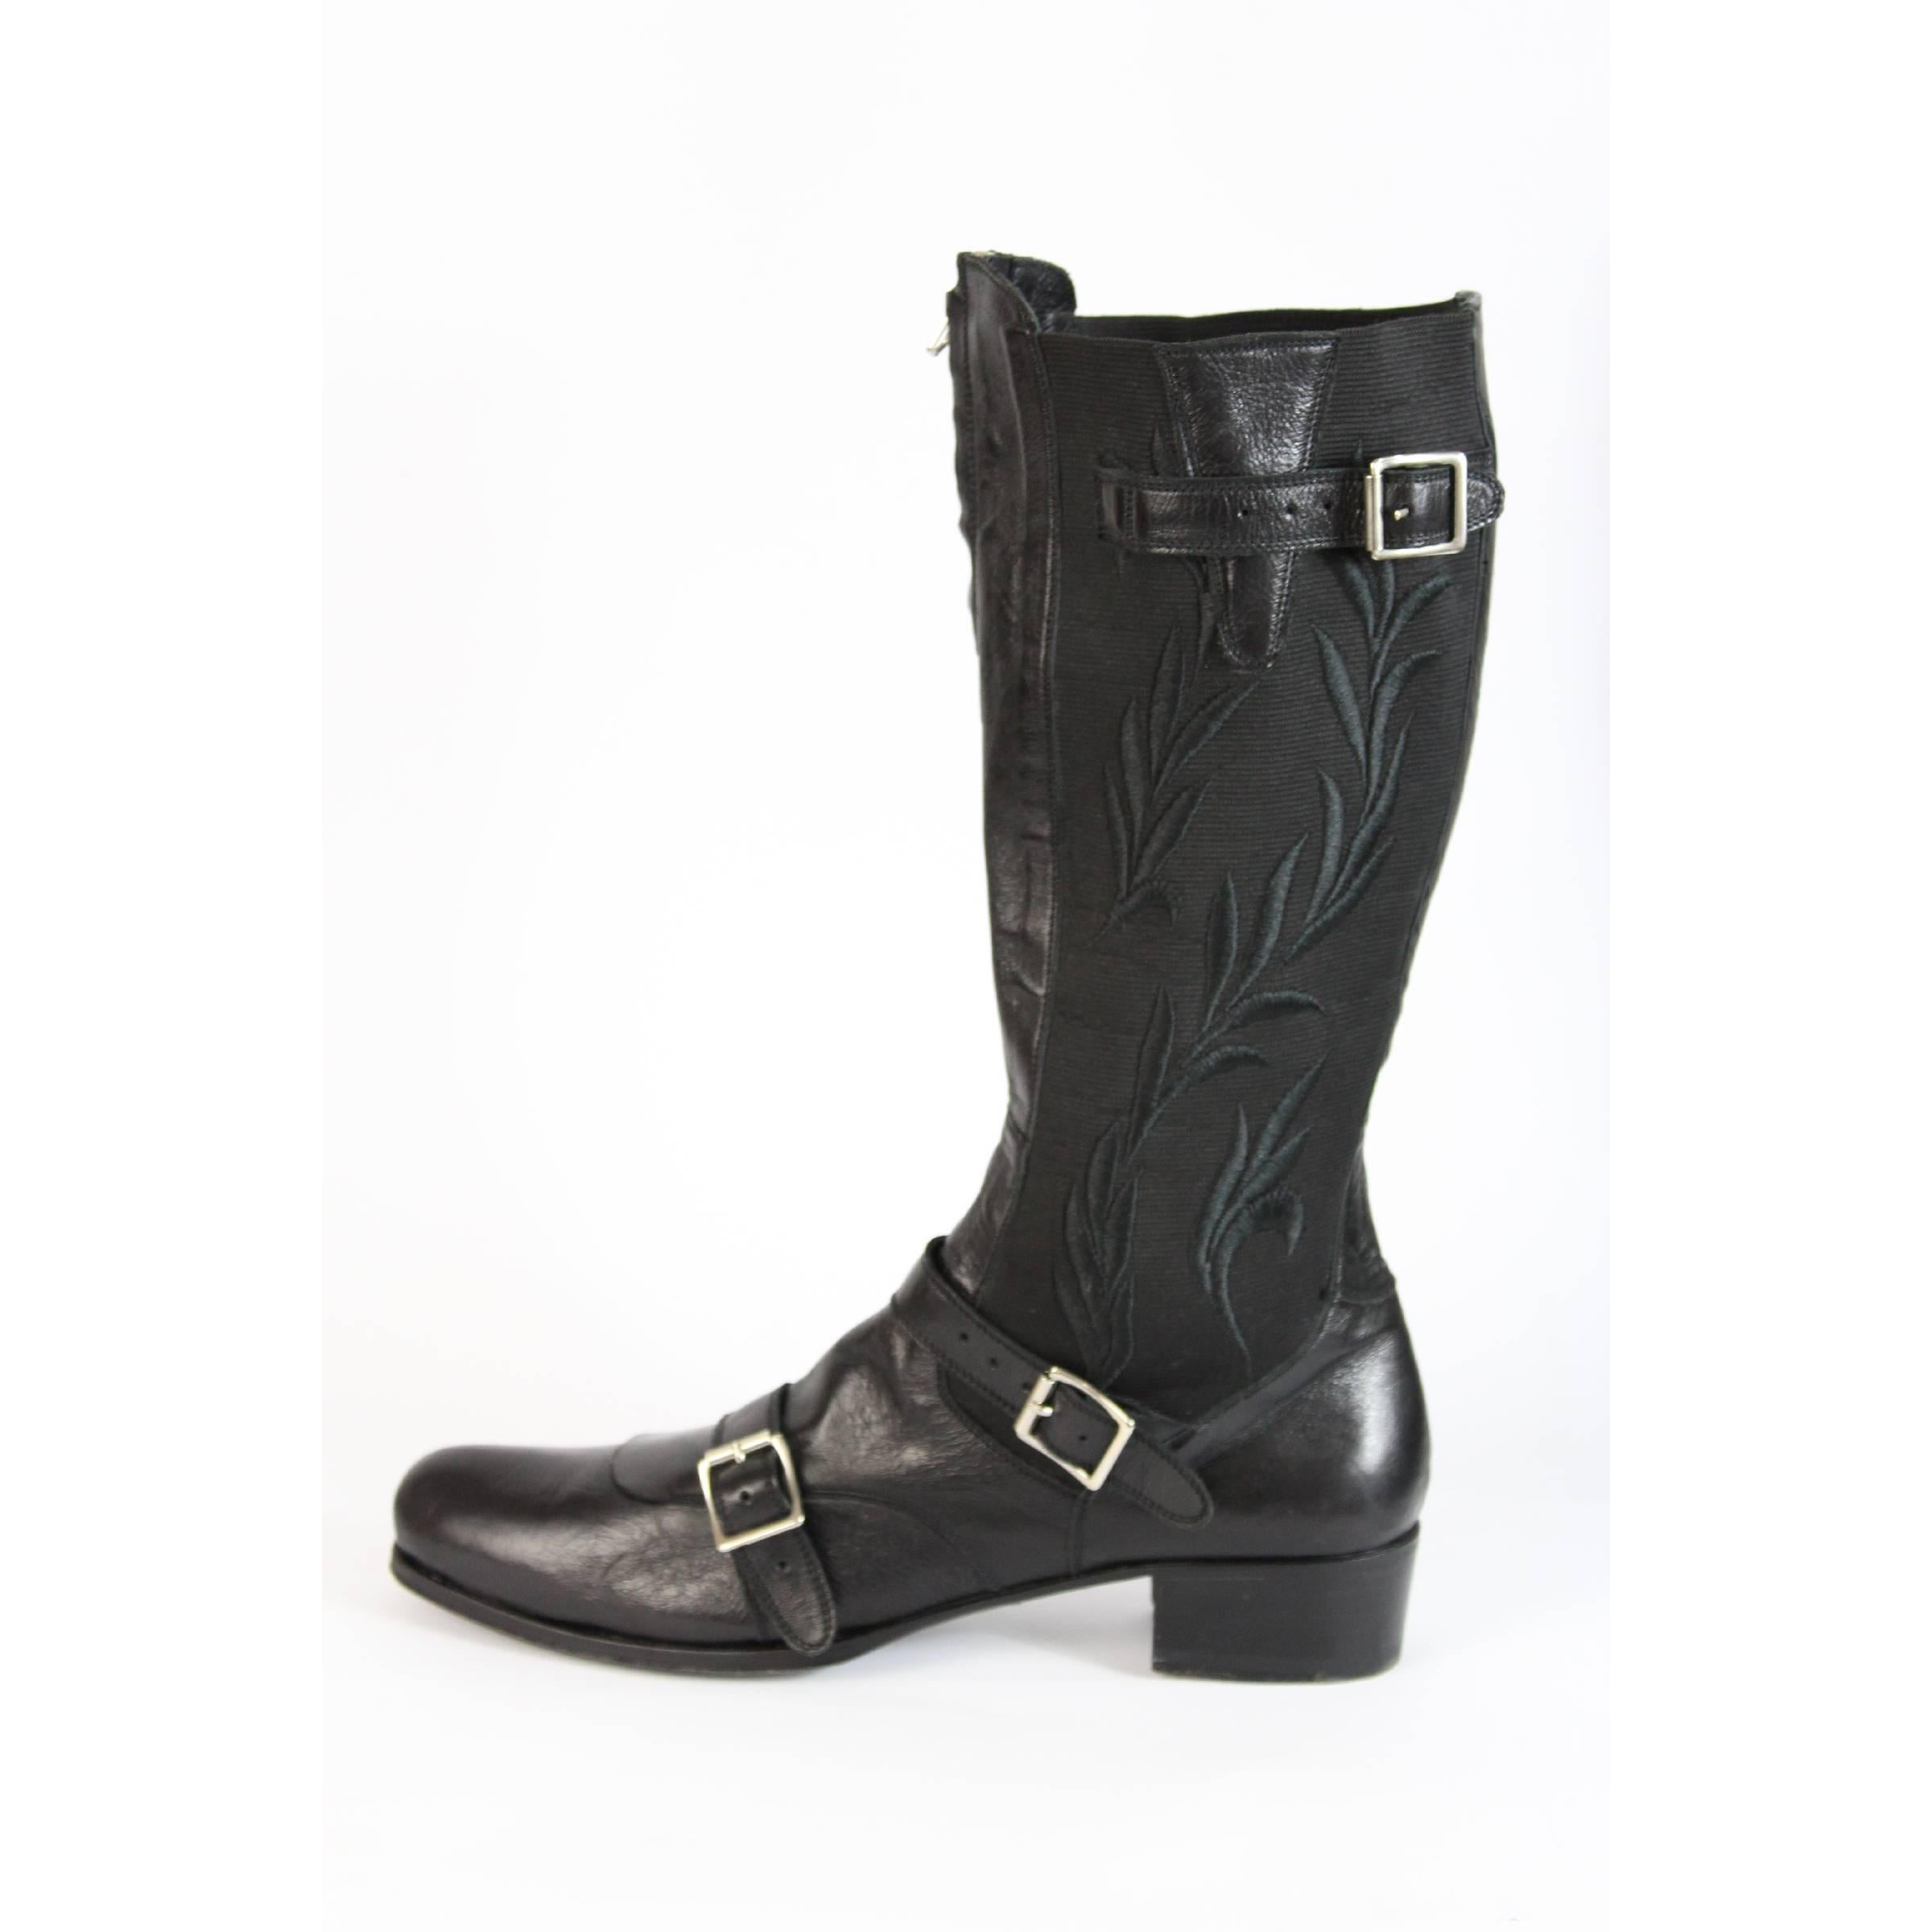 Gianni Barbato handmade boots, black color, 100% handmade leather. Zipper closure and two buckles on the side, along the boot tone-on-tone floral motifs. Two buckles on the instep, block heel. Made in Italy. Excellent vintage conditions.

Size 40 It